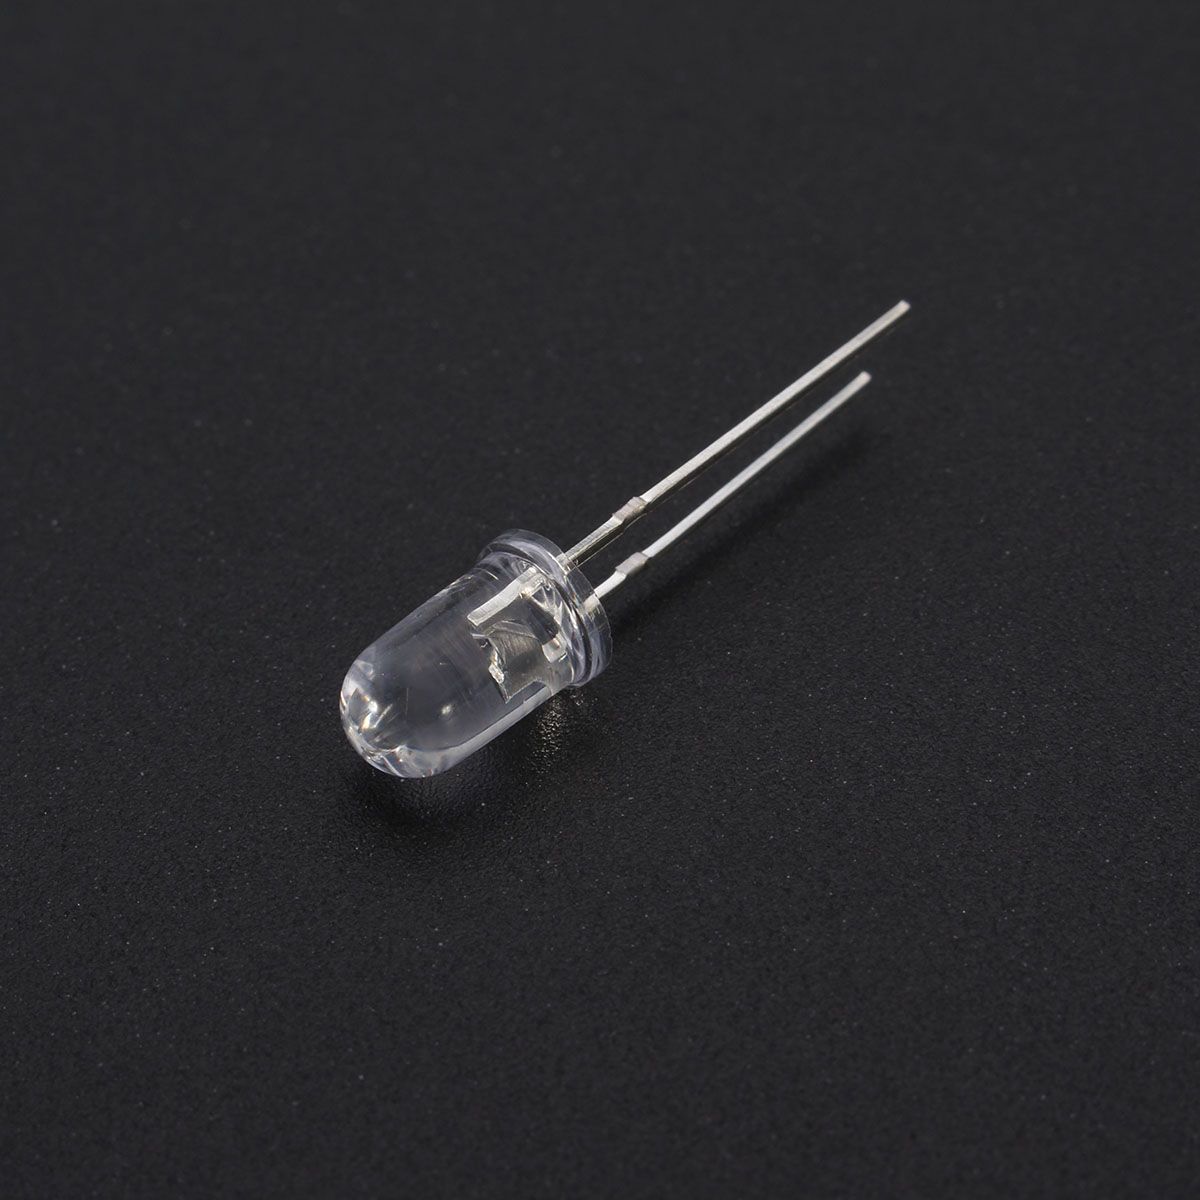 5mm-Round-2-pin-LED-Light-Wide-Angle-Bright-Bi-pin-DIY-Diode-Bulb-Lamp-5-Colors-84971